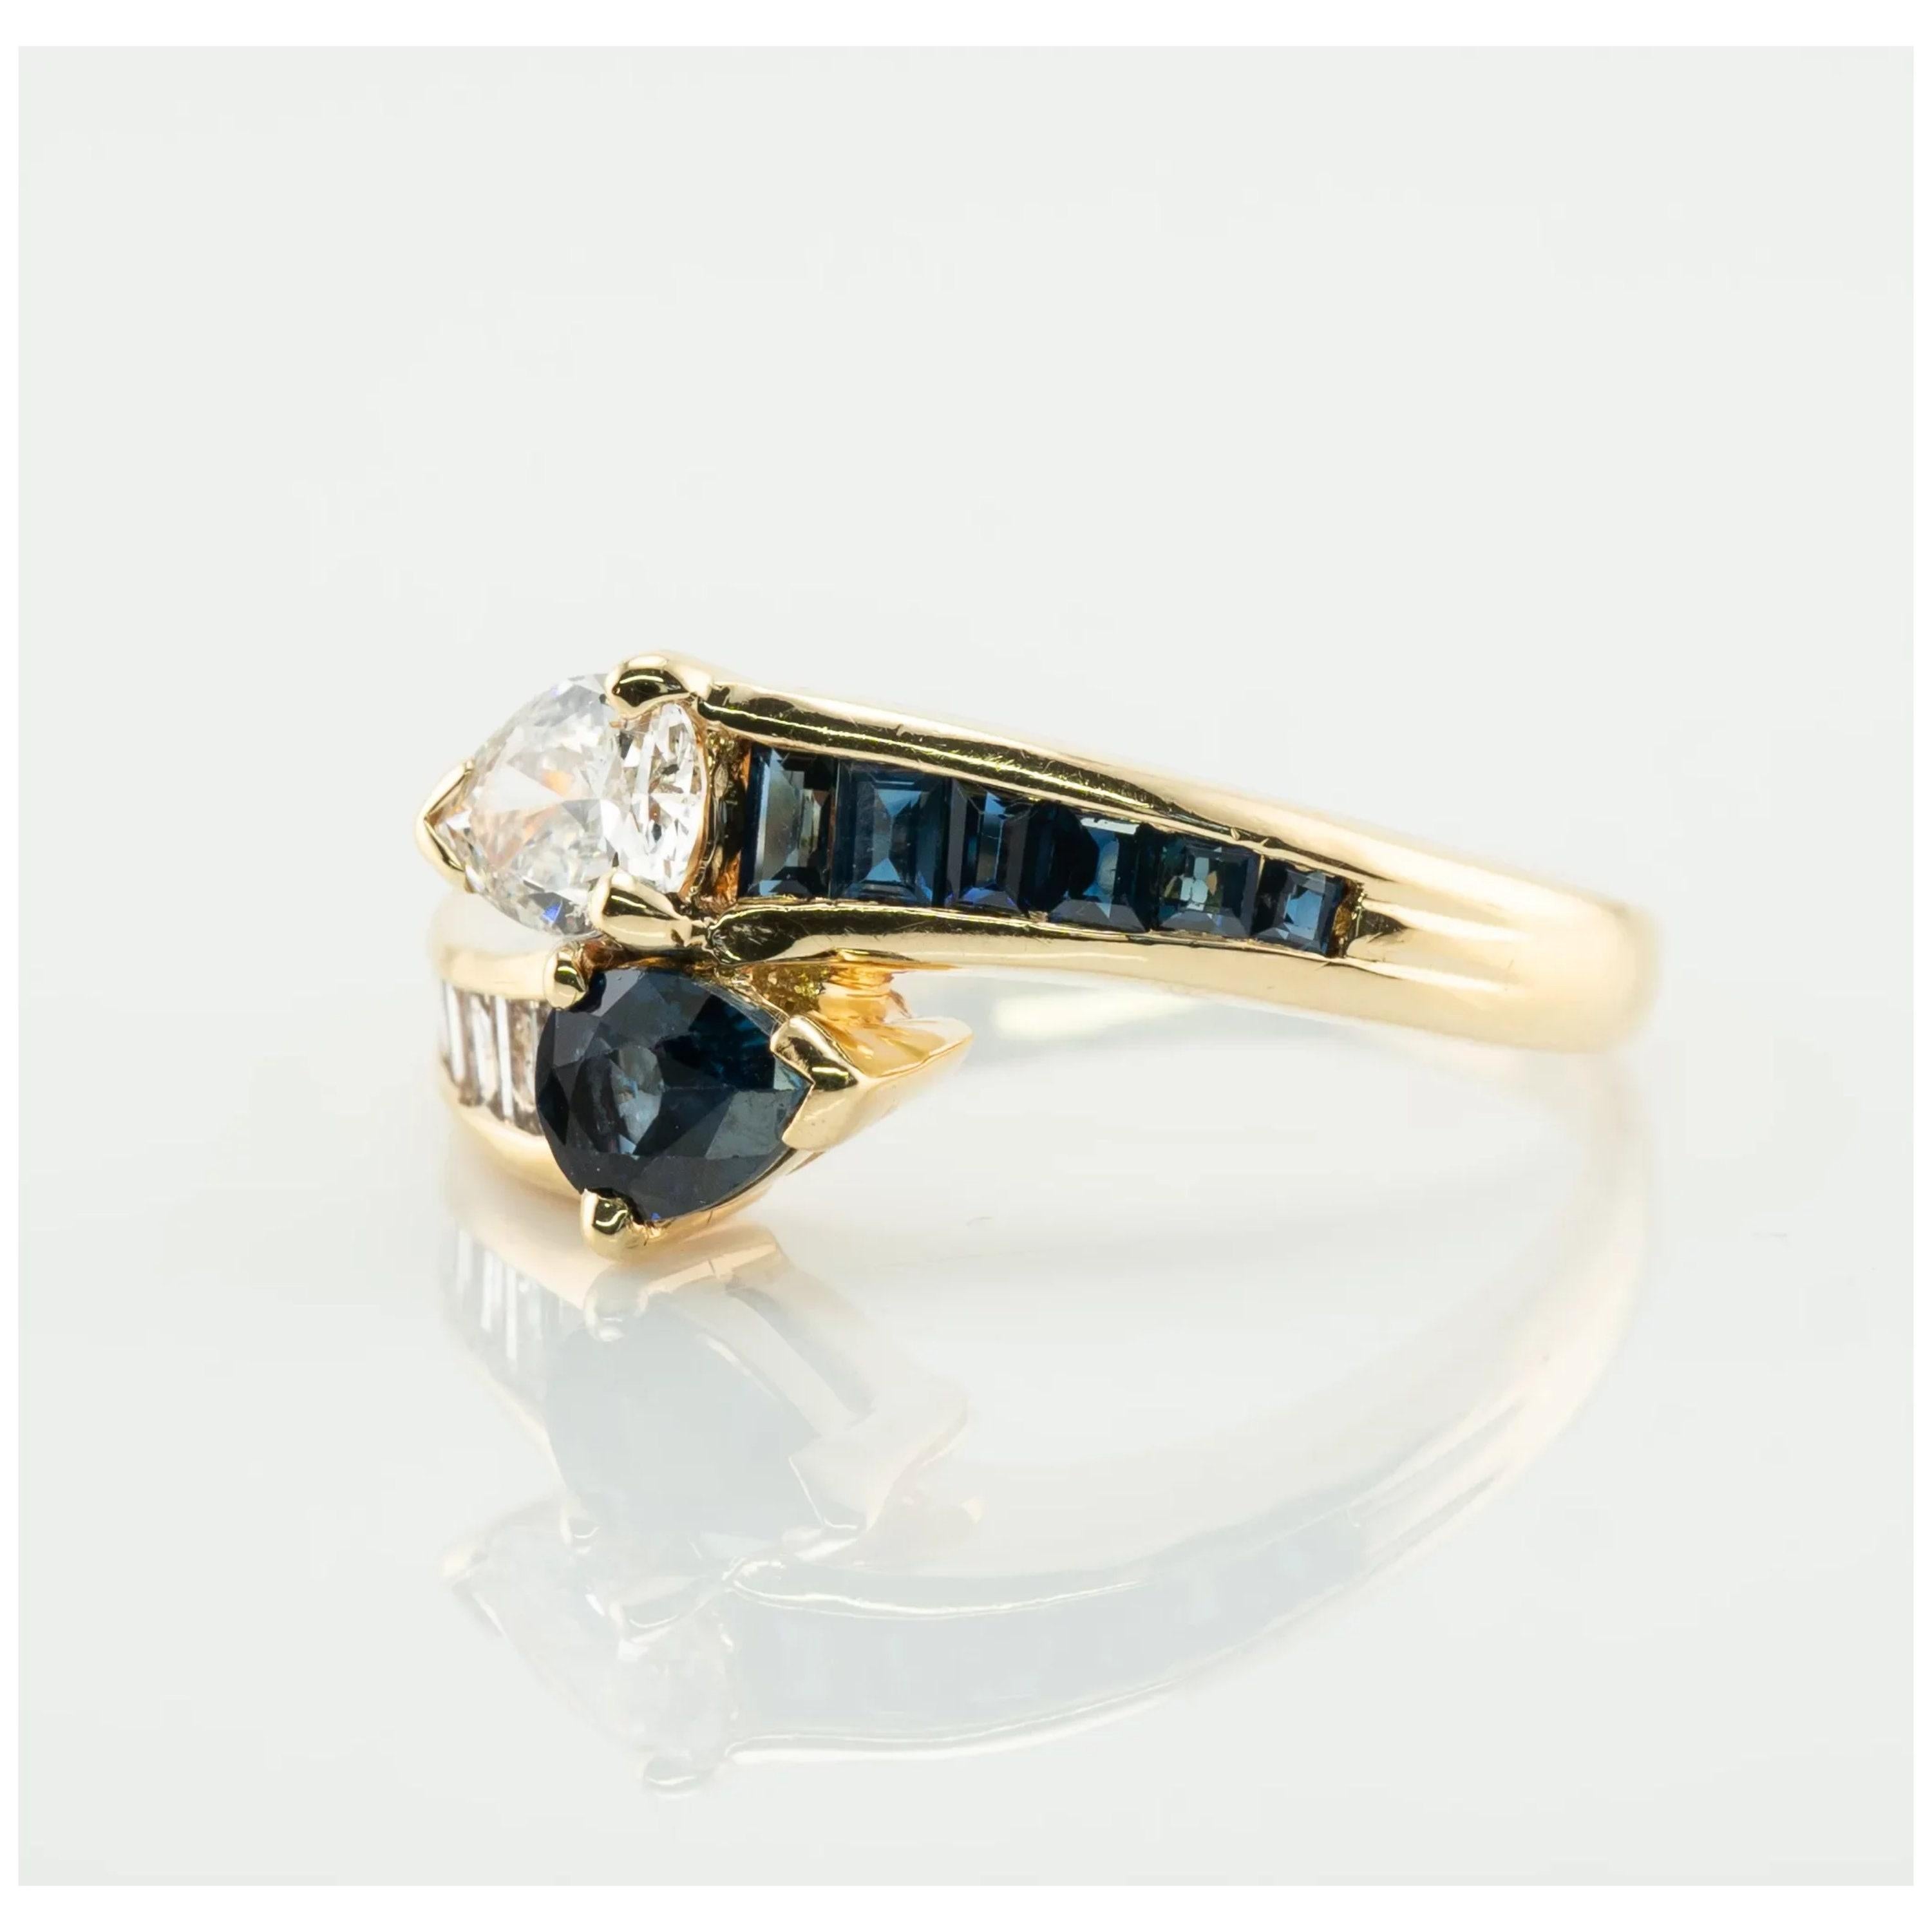 For Sale:  1.21 Pear Cut Diamond Sapphire Engagement Ring, Art Deco Snake Sapphire Ring 4